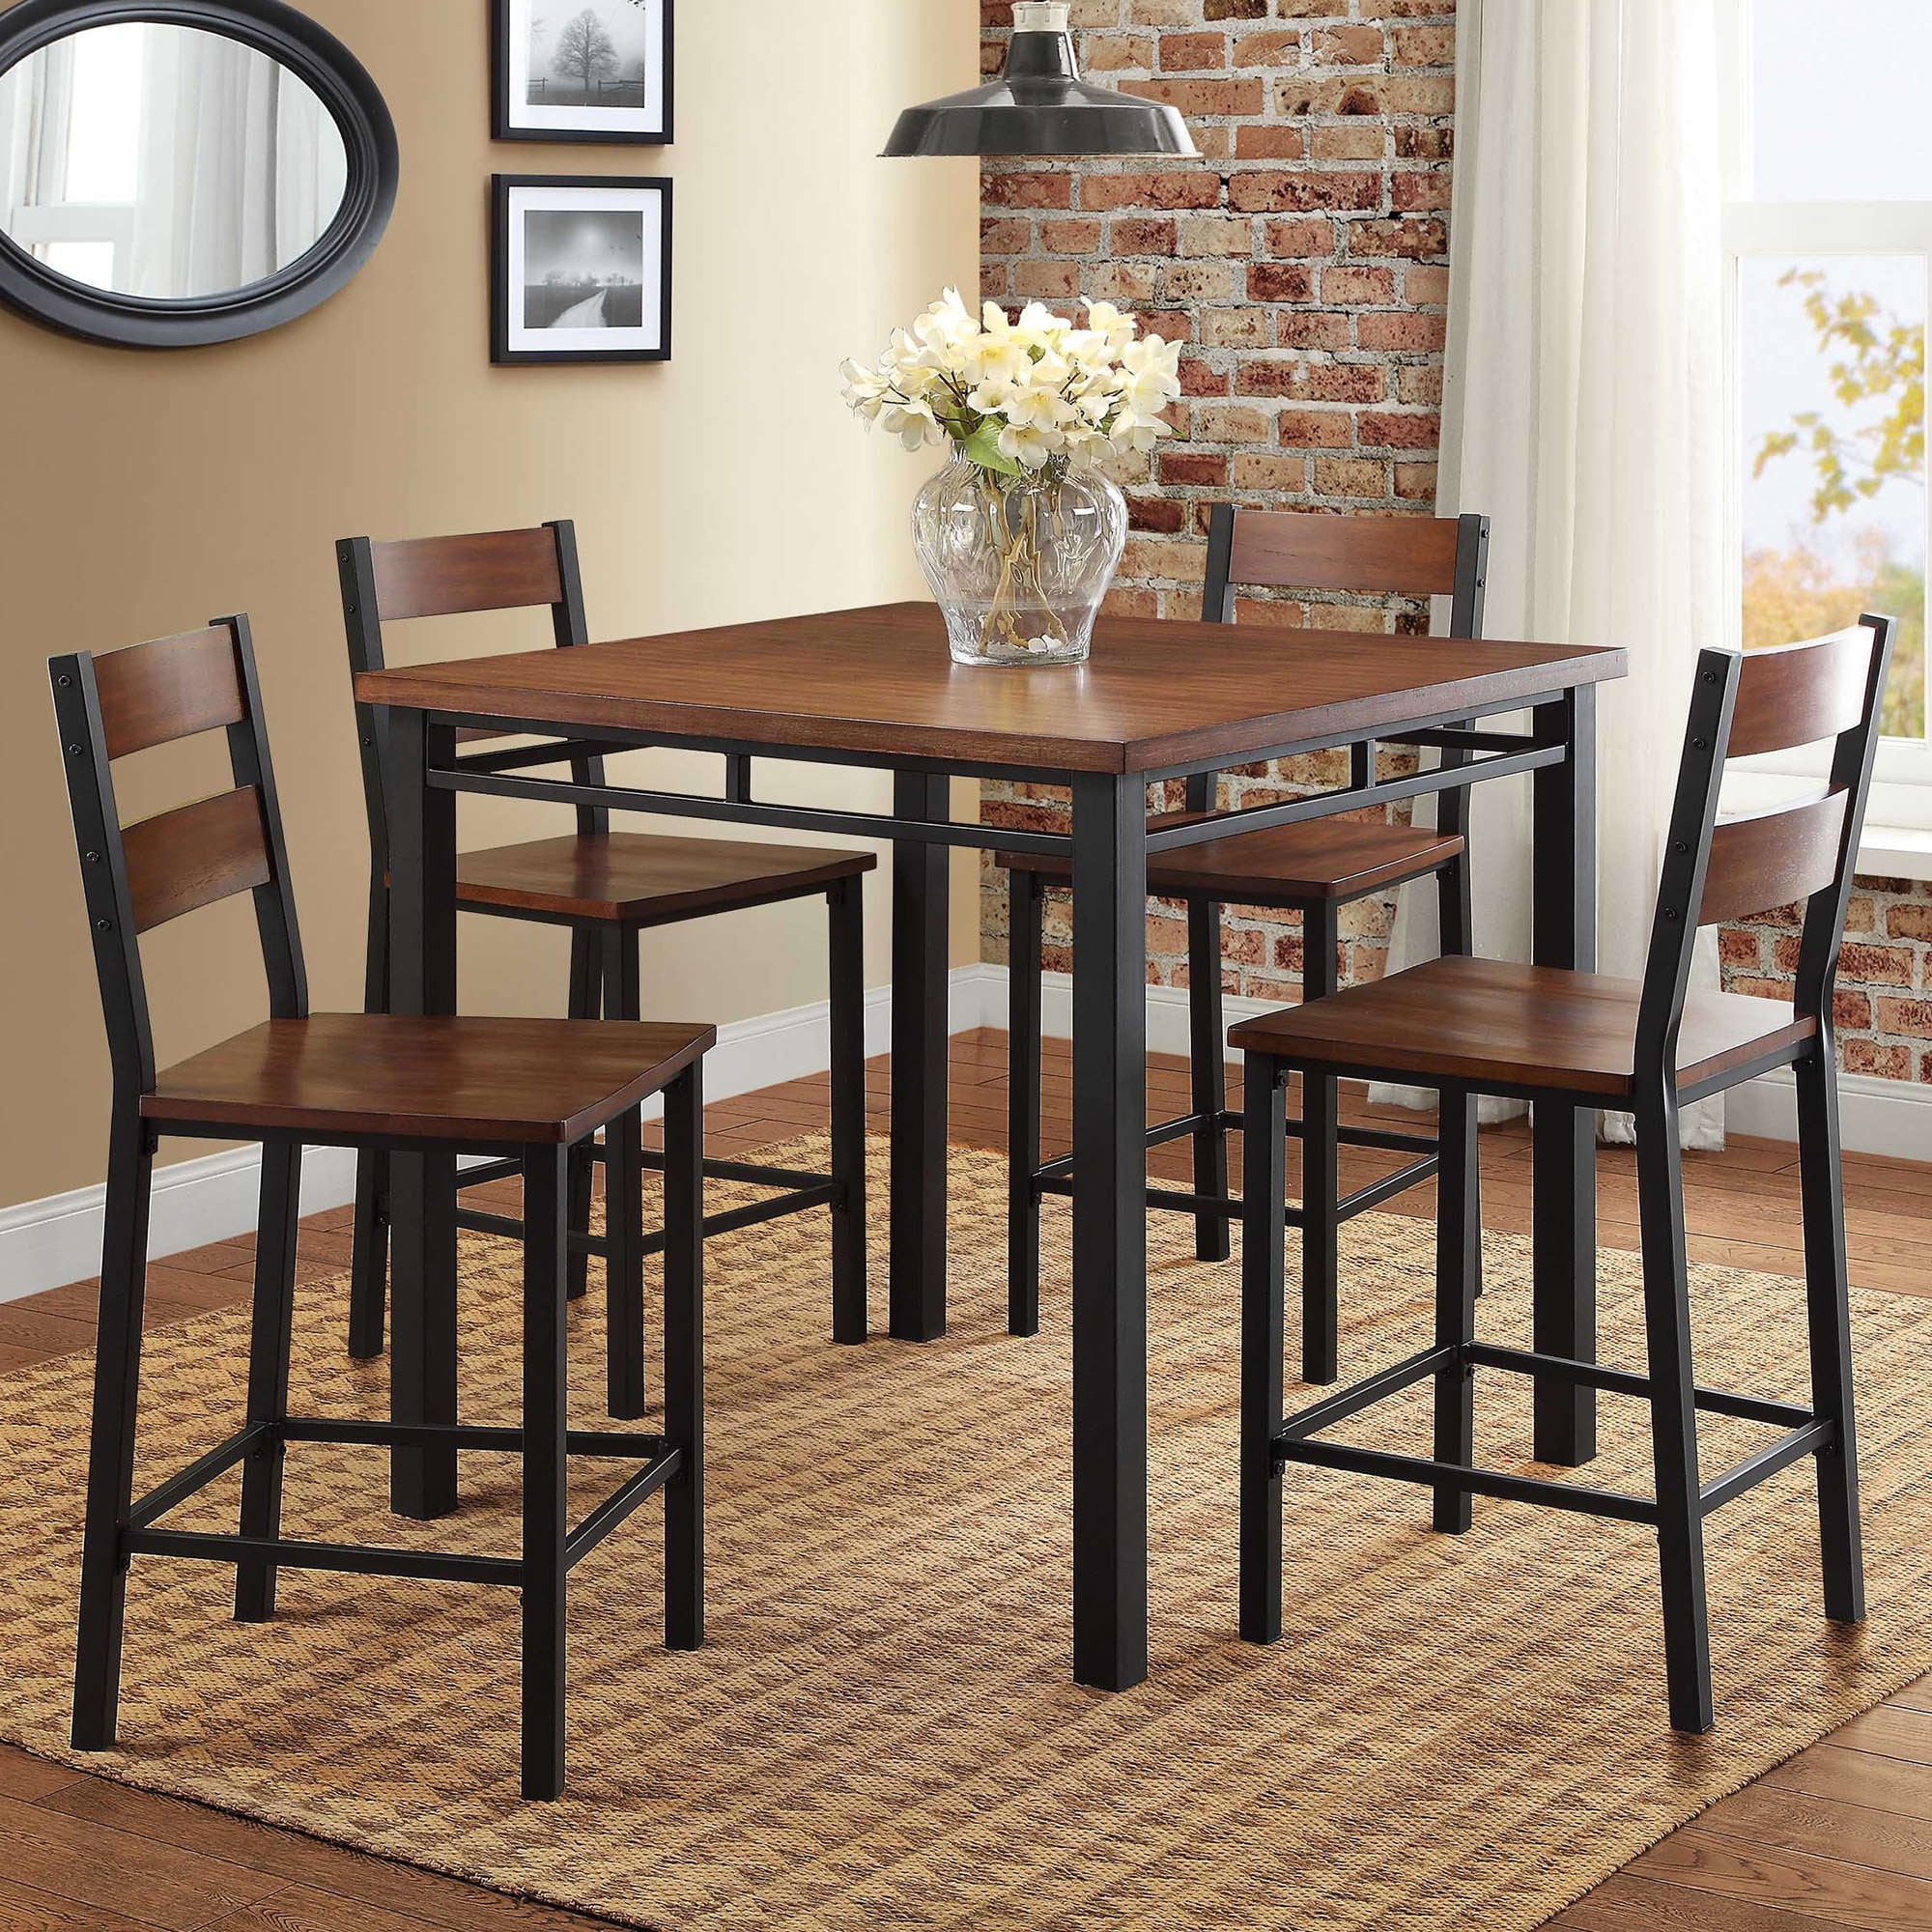 Mainstay 5-Piece Counter Height Dining Set Warm in Black 2 Pack